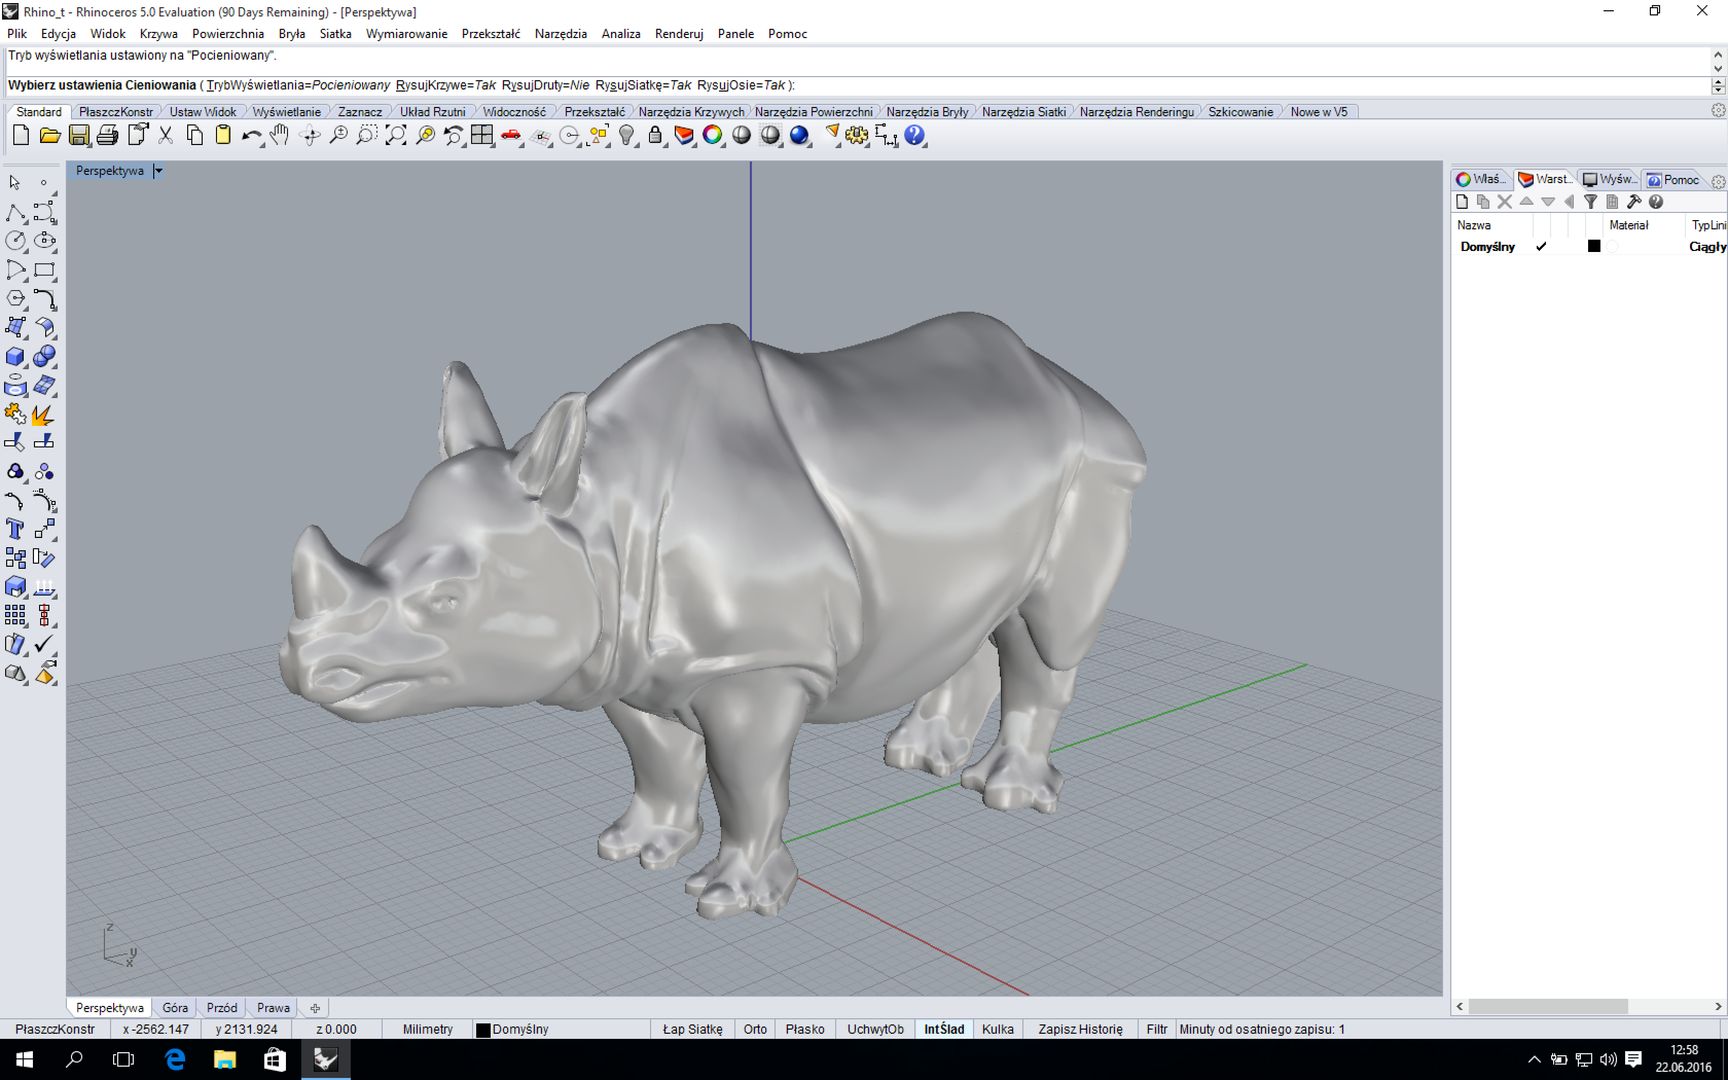 Rhinoceros 3D 7.32.23215.19001 download the new version for ios